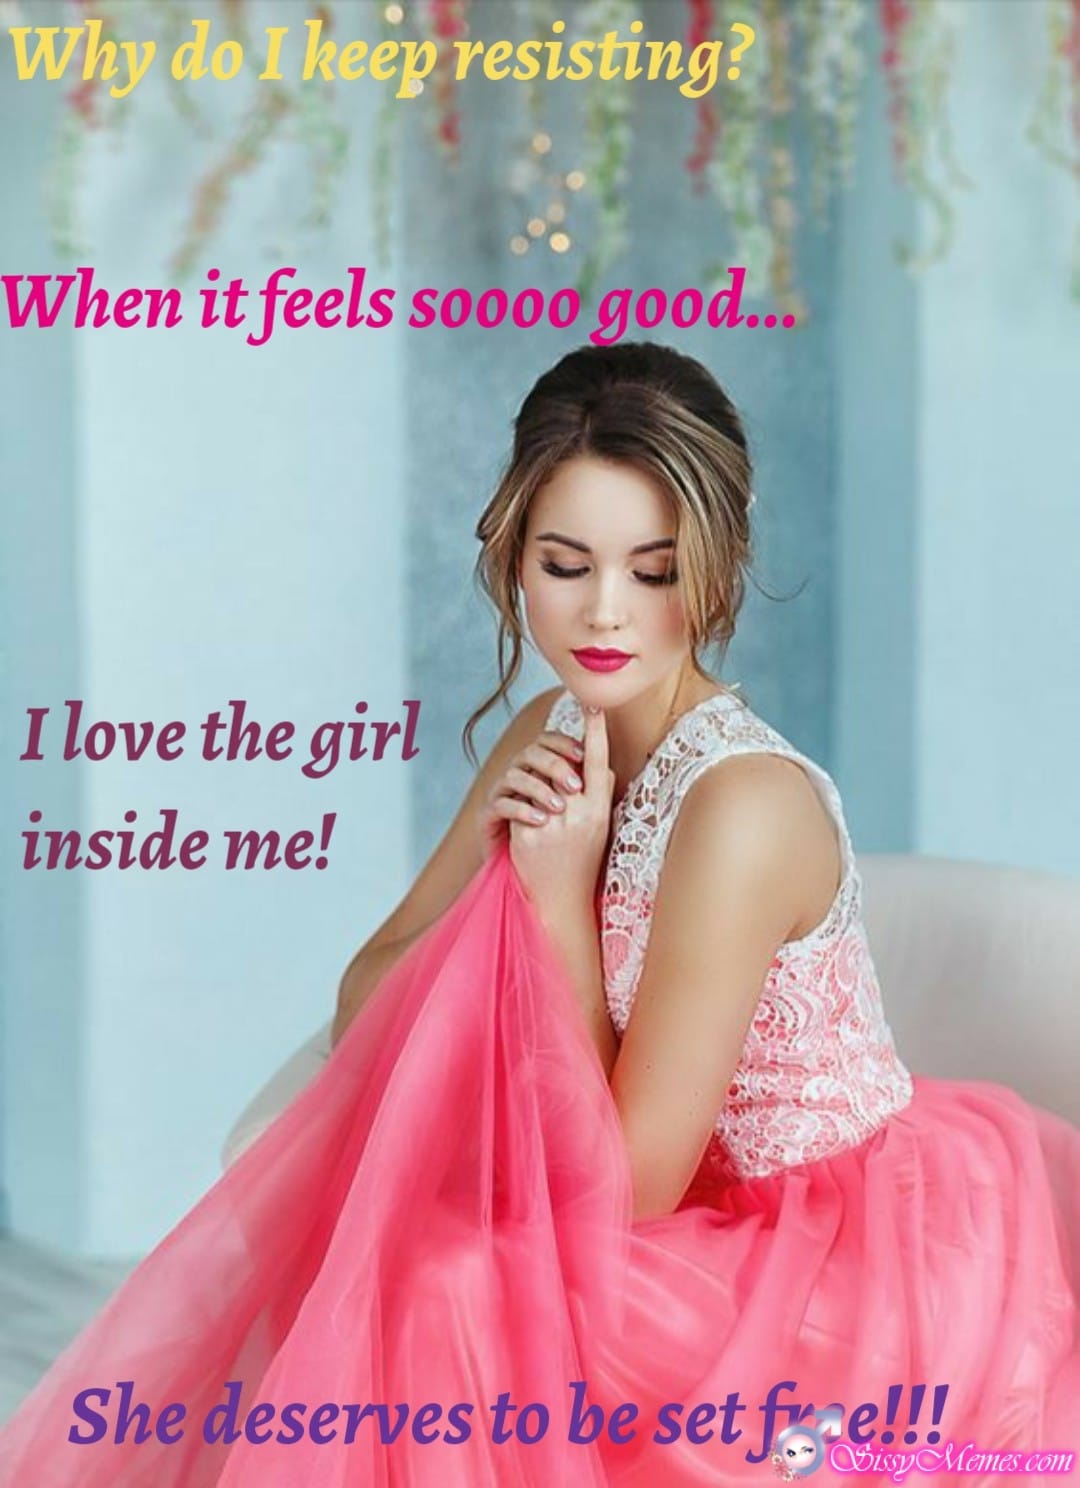 Trap Teen Sexy Feminization sissy caption: Why do I keep resisting? When it feels soooo good… I love the girl inside me! She deserves to be set free!!! Romantic Girlyboy Dreams of Becoming a Girl